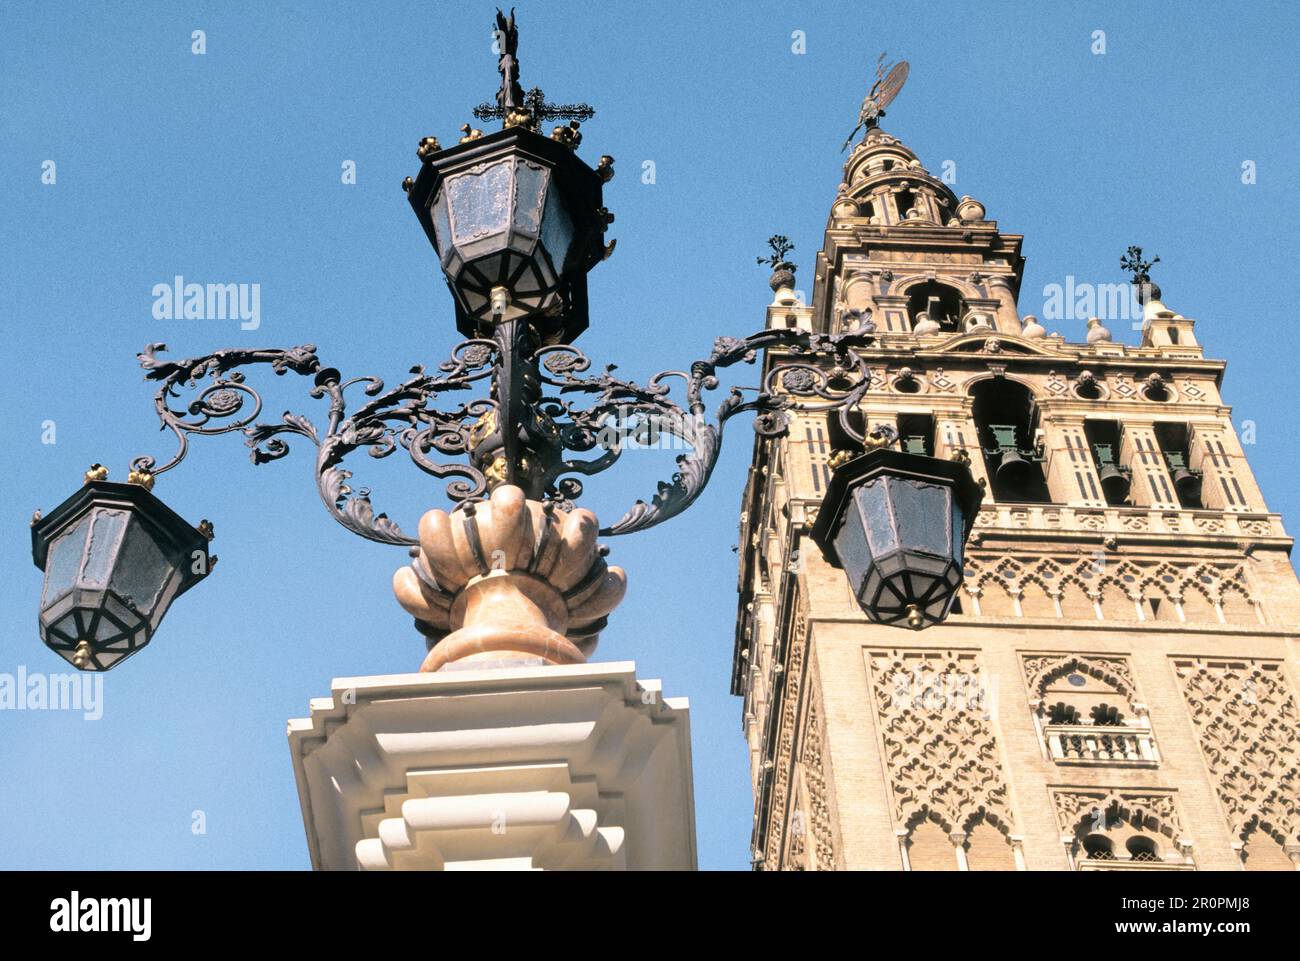 La Giralda Cathedral Bell Tower Seville Spain Andalusia  Ornate old street lamp on public square.  Historic UNESCO World Heritage Site. Landmark day Stock Photo